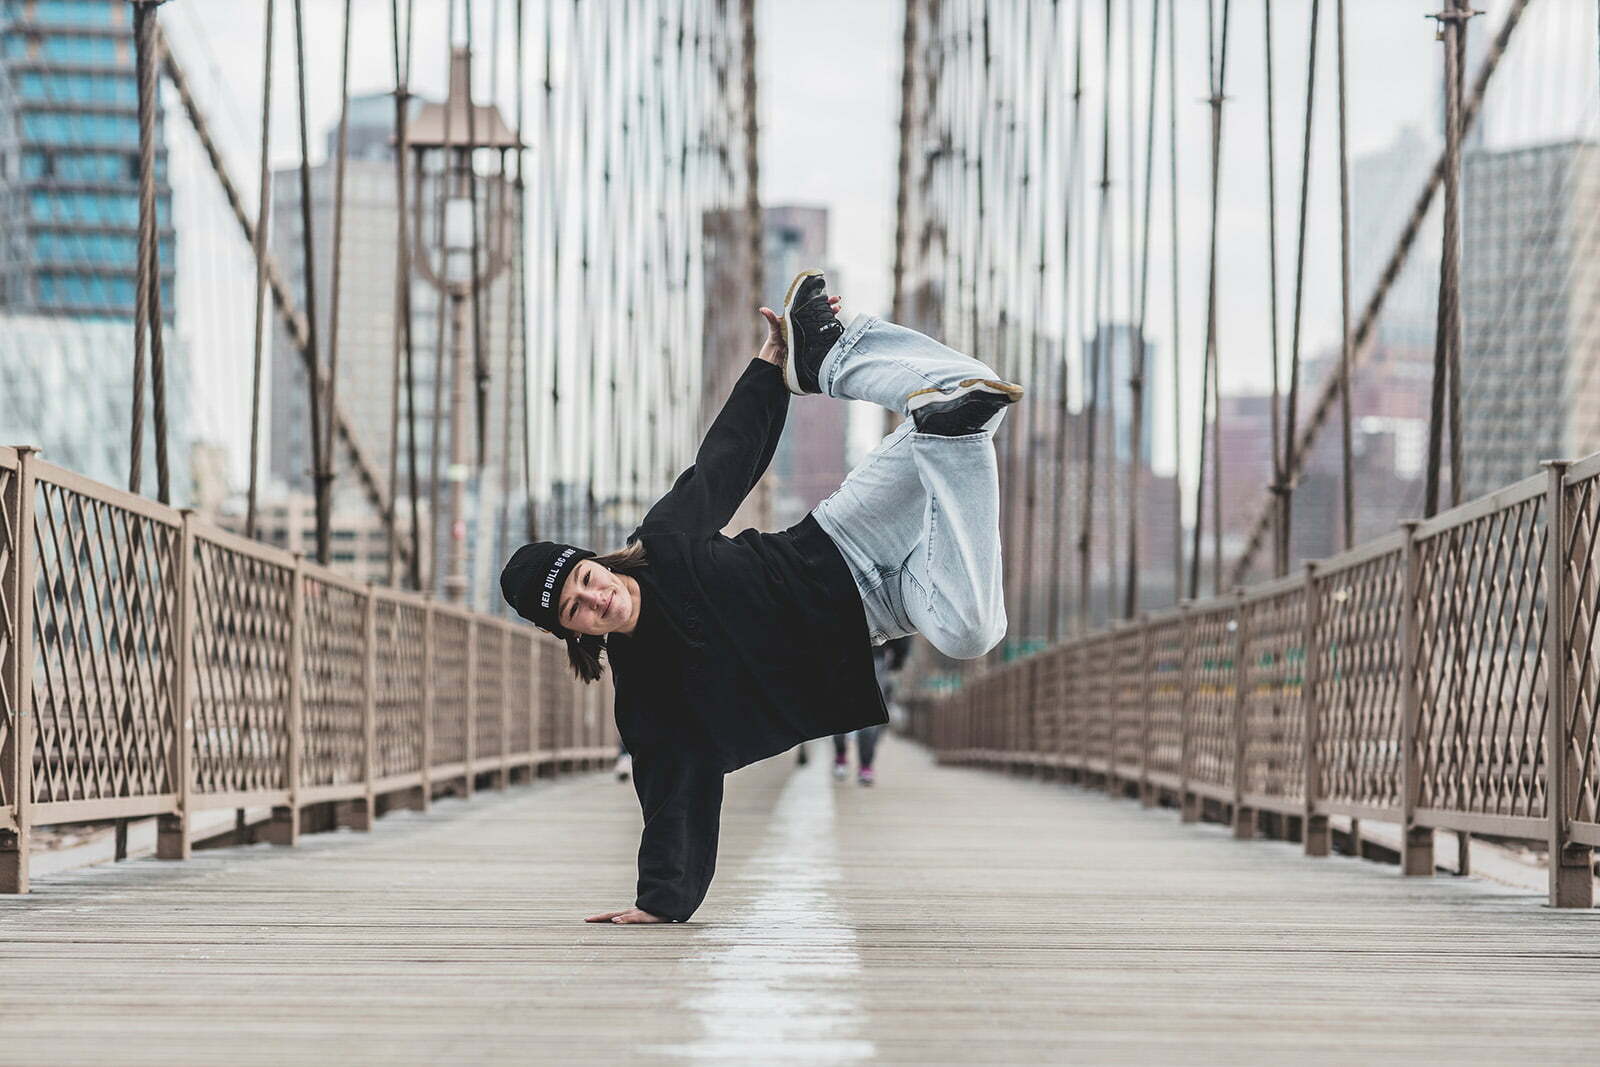 B-Girl Kate poses for a portrait at Red Bull BC One World Final New York 2022 in New York, USA on February 8, 2022